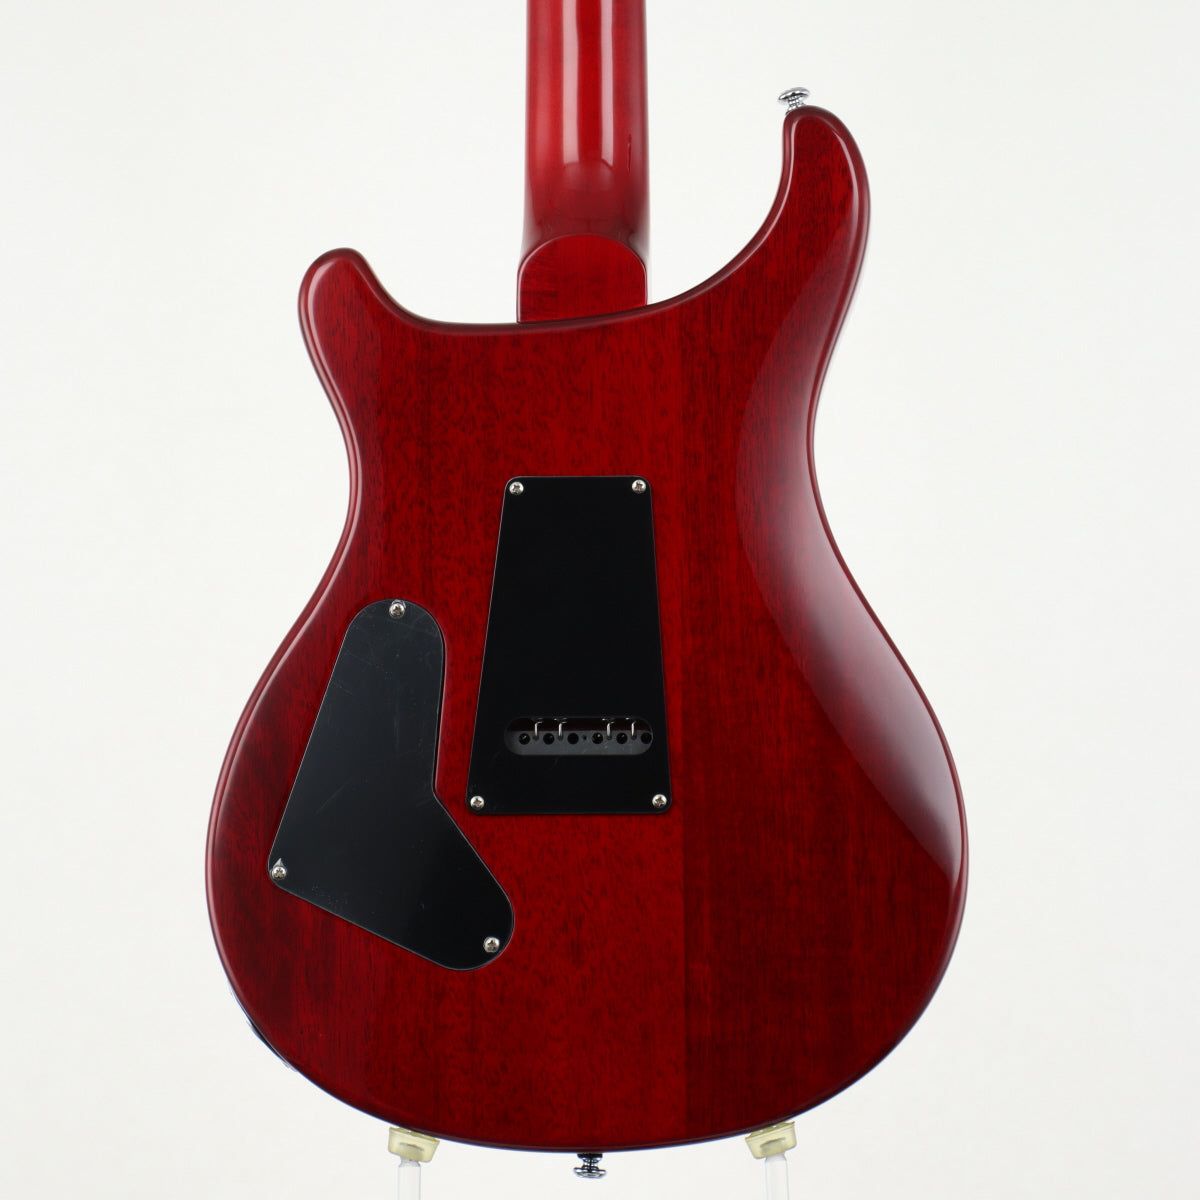 [SN R06503] USED Paul Reed Smith (PRS) / SE CUSTOM 24 Beveled Top Scarlet Red [12]